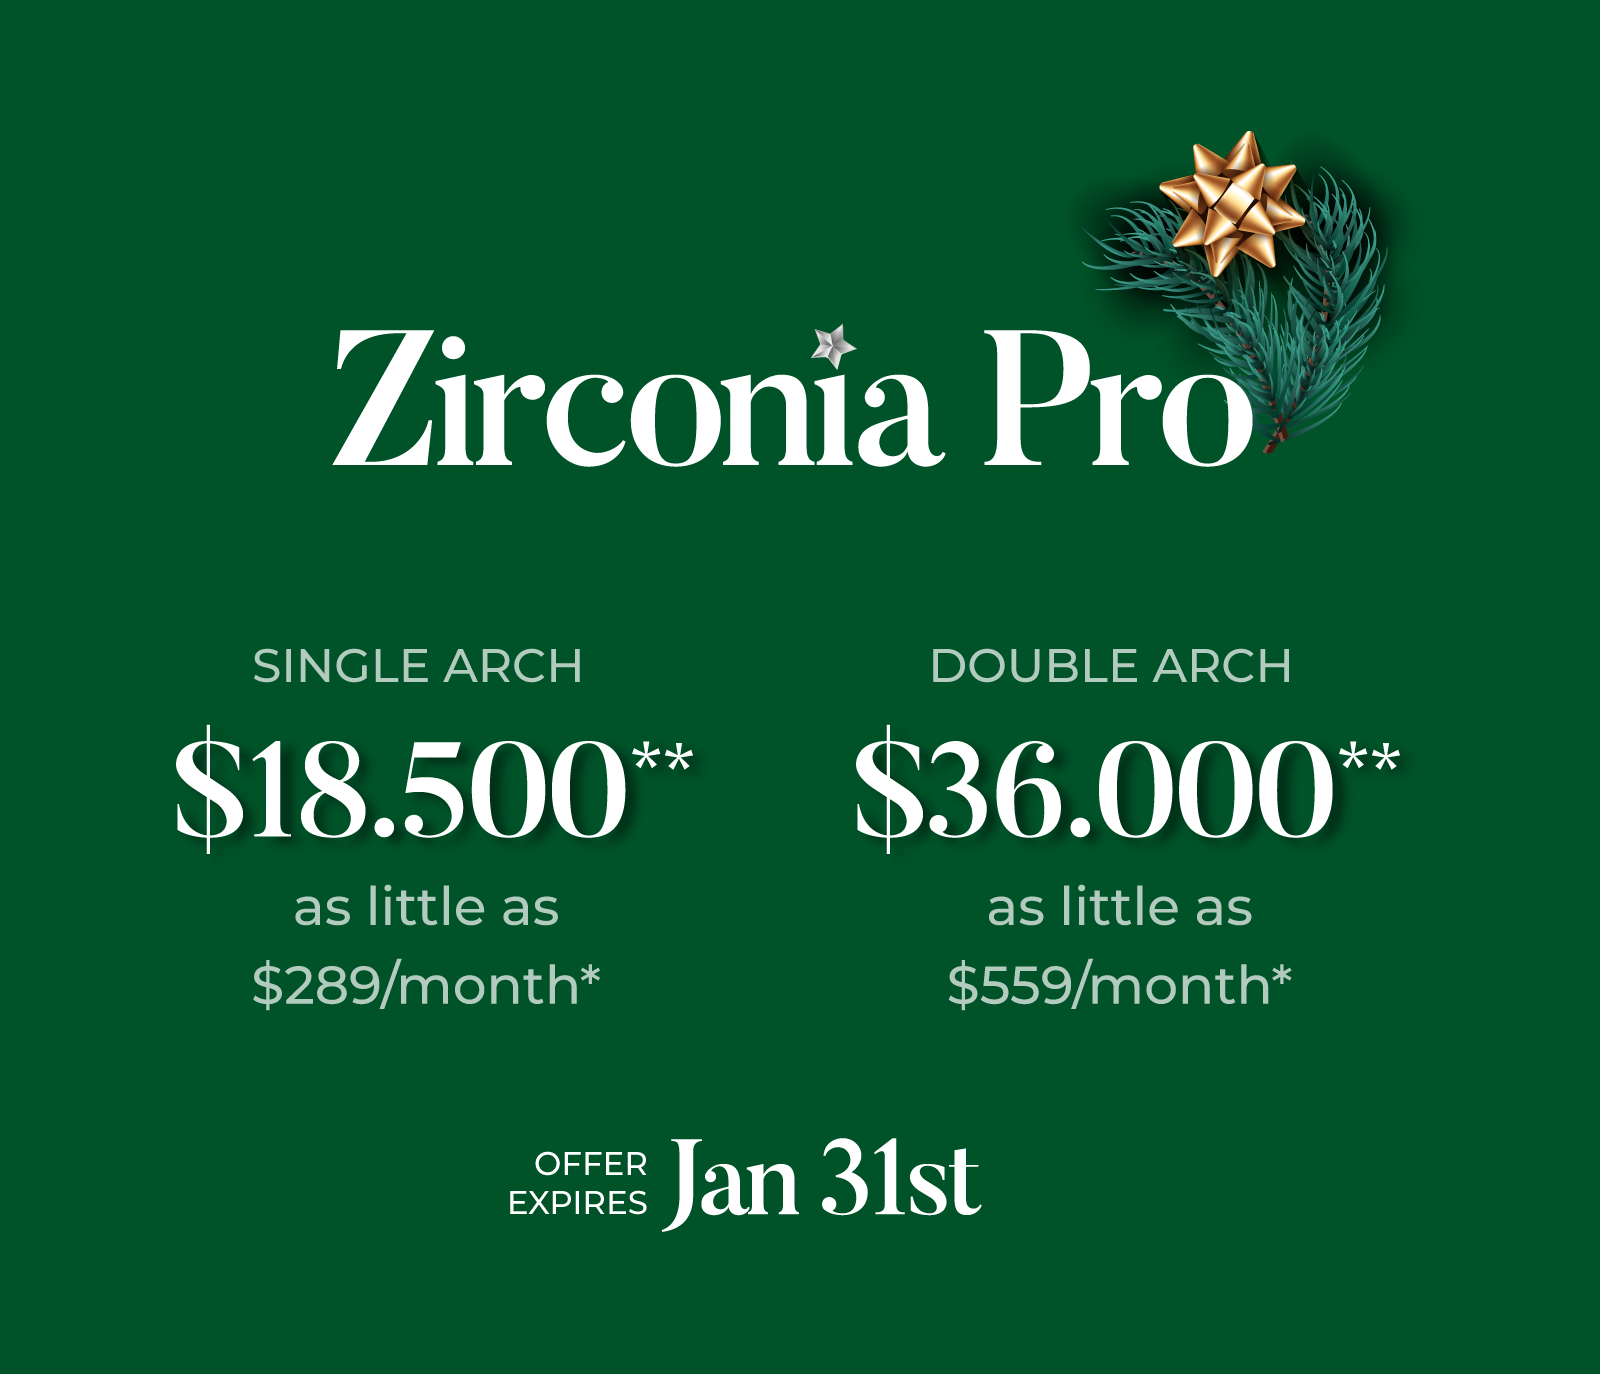 1 Week Zirconia $18,500 Single Arch & $36,000 Upper and Lower Arches